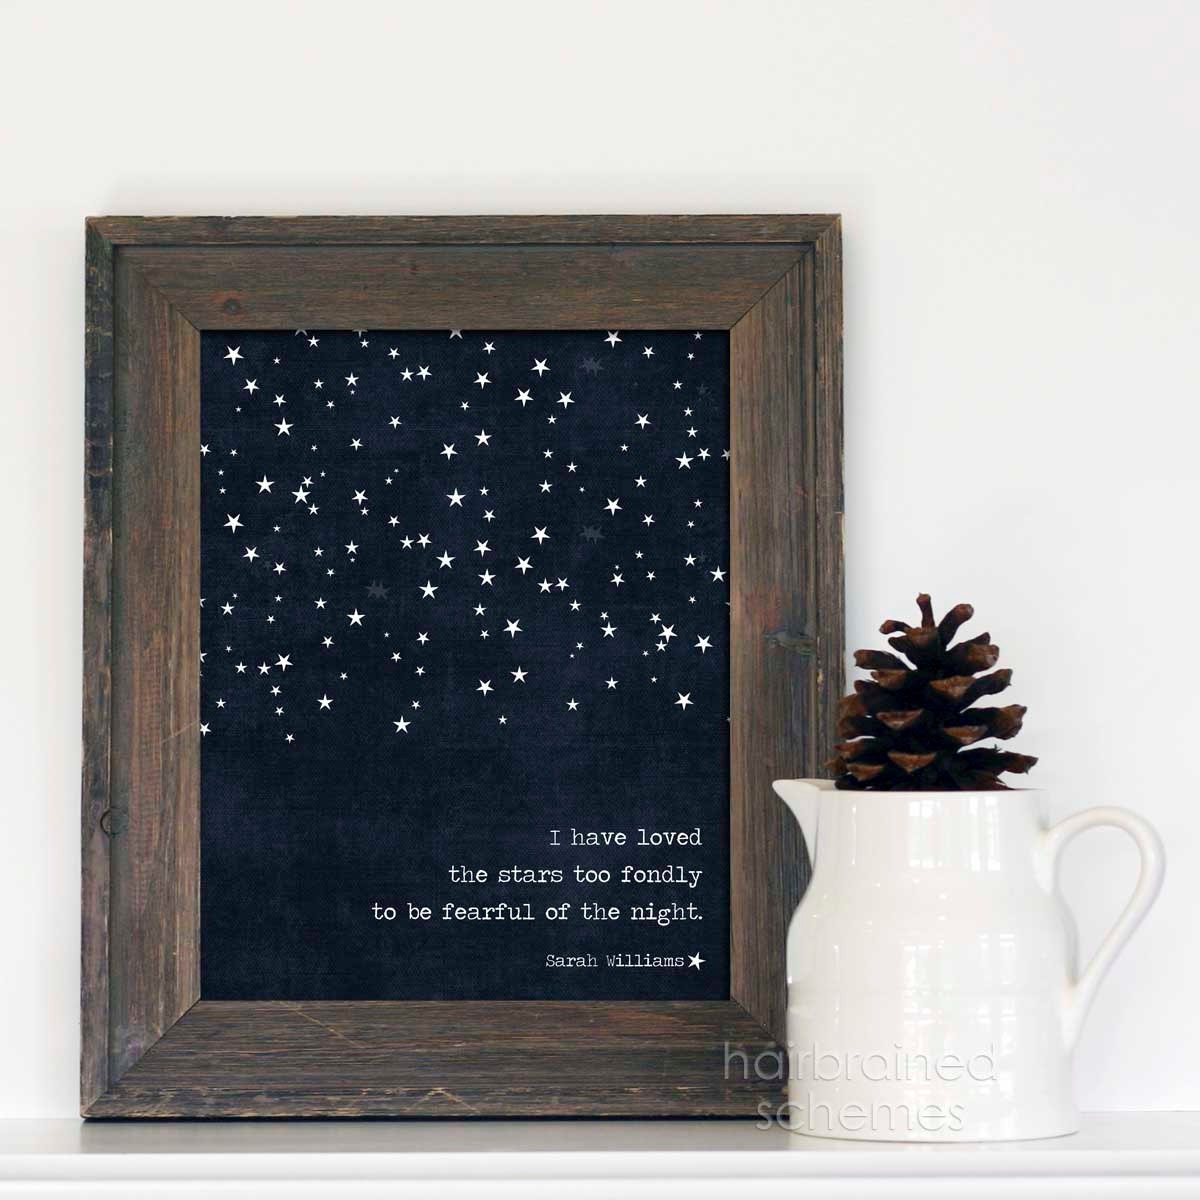 Digital Art Print I Have Loved the Stars Too Fondly To Be Fearful of the Night Poster Navy Blue Stars Modern Galileo Inspired Quote Print - hairbrainedschemes